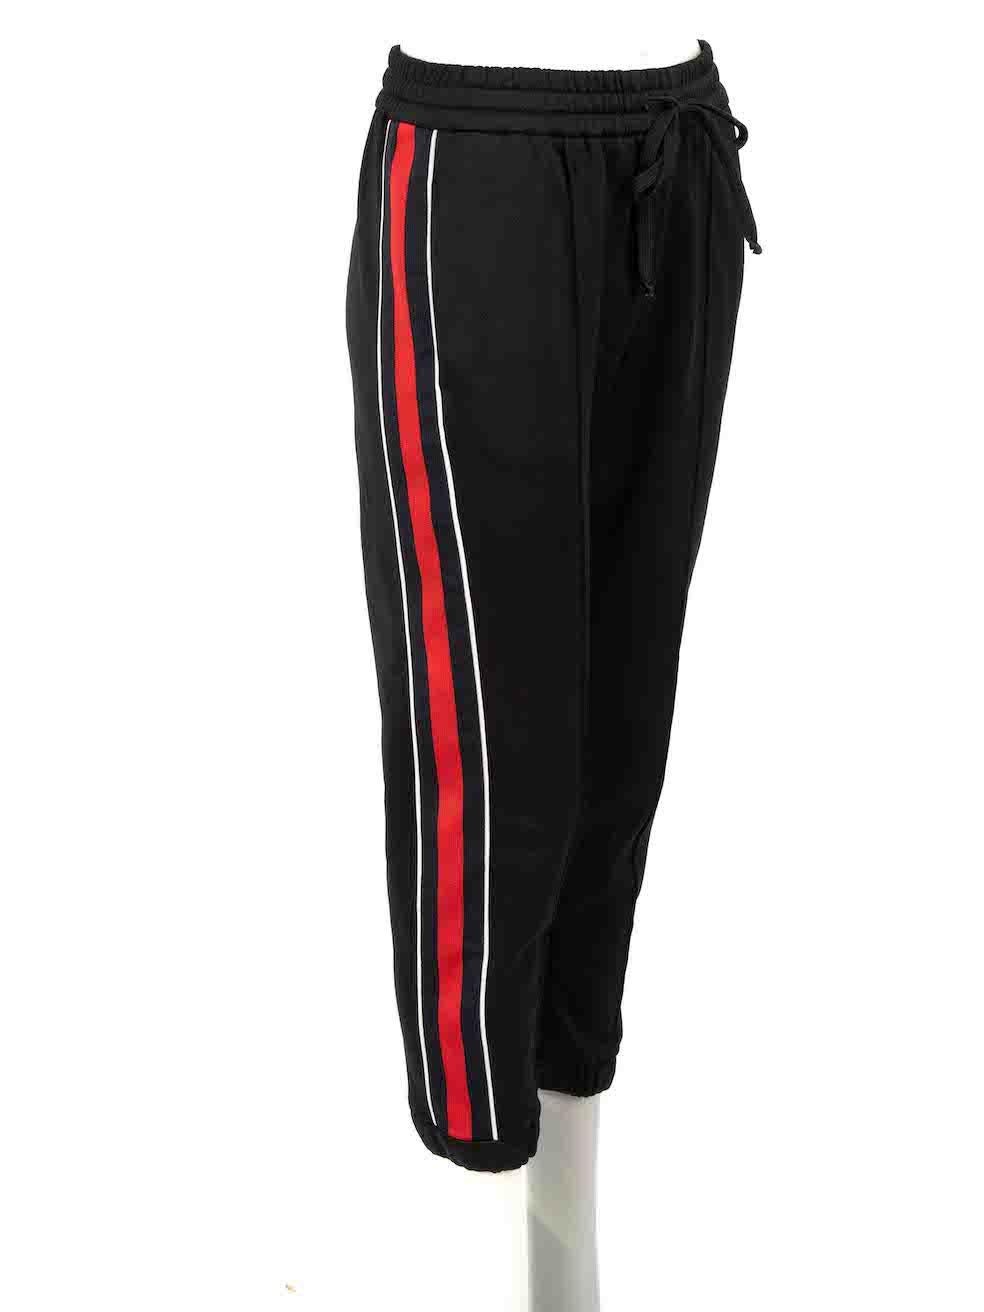 CONDITION is Very good. Hardly any visible wear to trousers is evident on this used Gucci designer resale item.

Details
Black
Polyester
Track tapered trousers
Webbing stripe tape detail
High rise
Elasticated with drawstring
Elasticated leg hem
Made